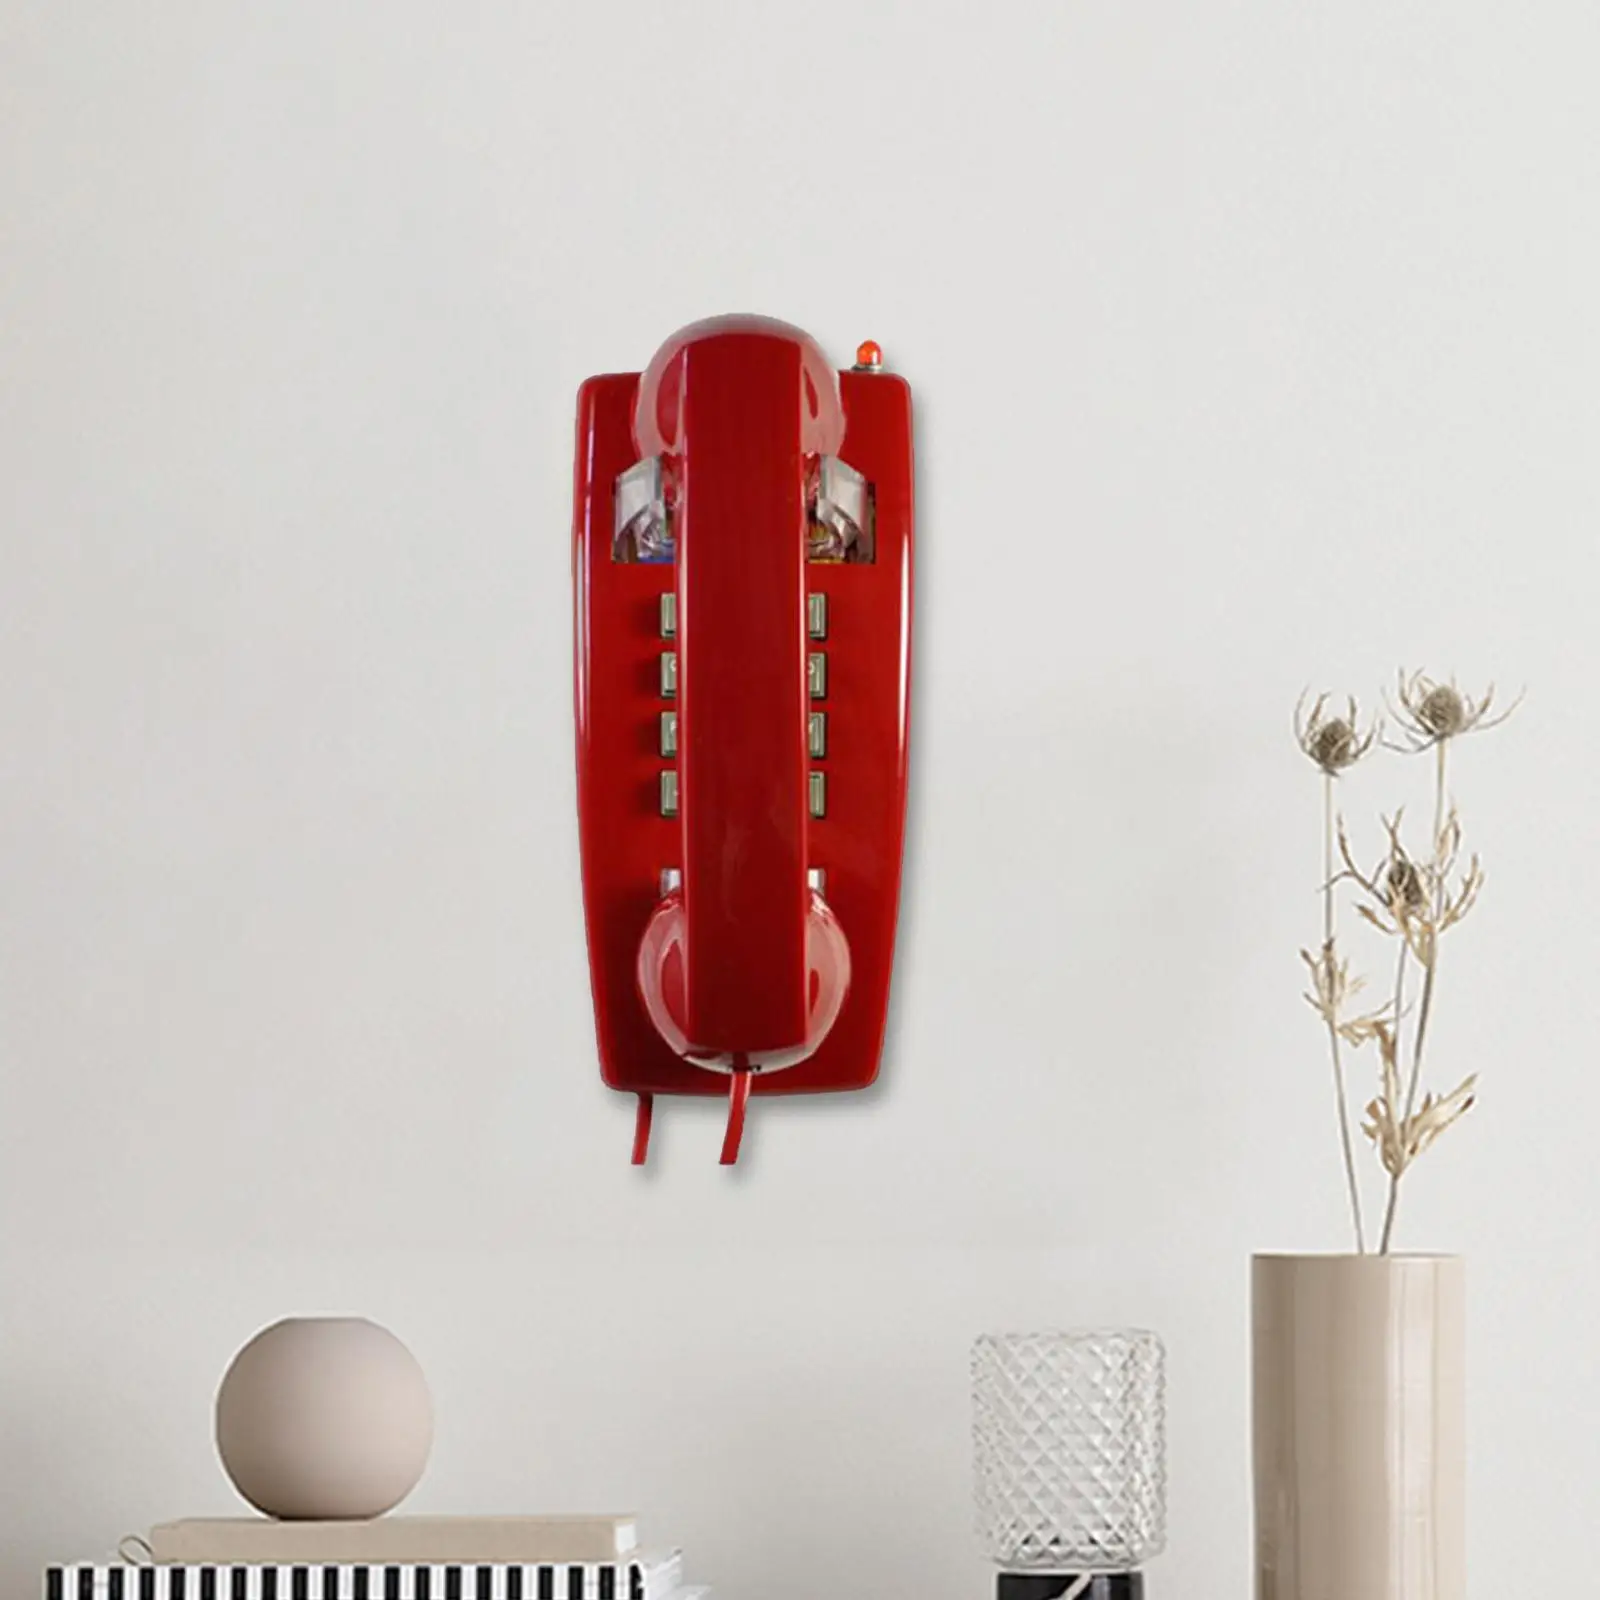 Retro Wall Phone Corded Wall Phone Wall Telephone Corded Telephone Old Style Phone for garage Room Airport Home School